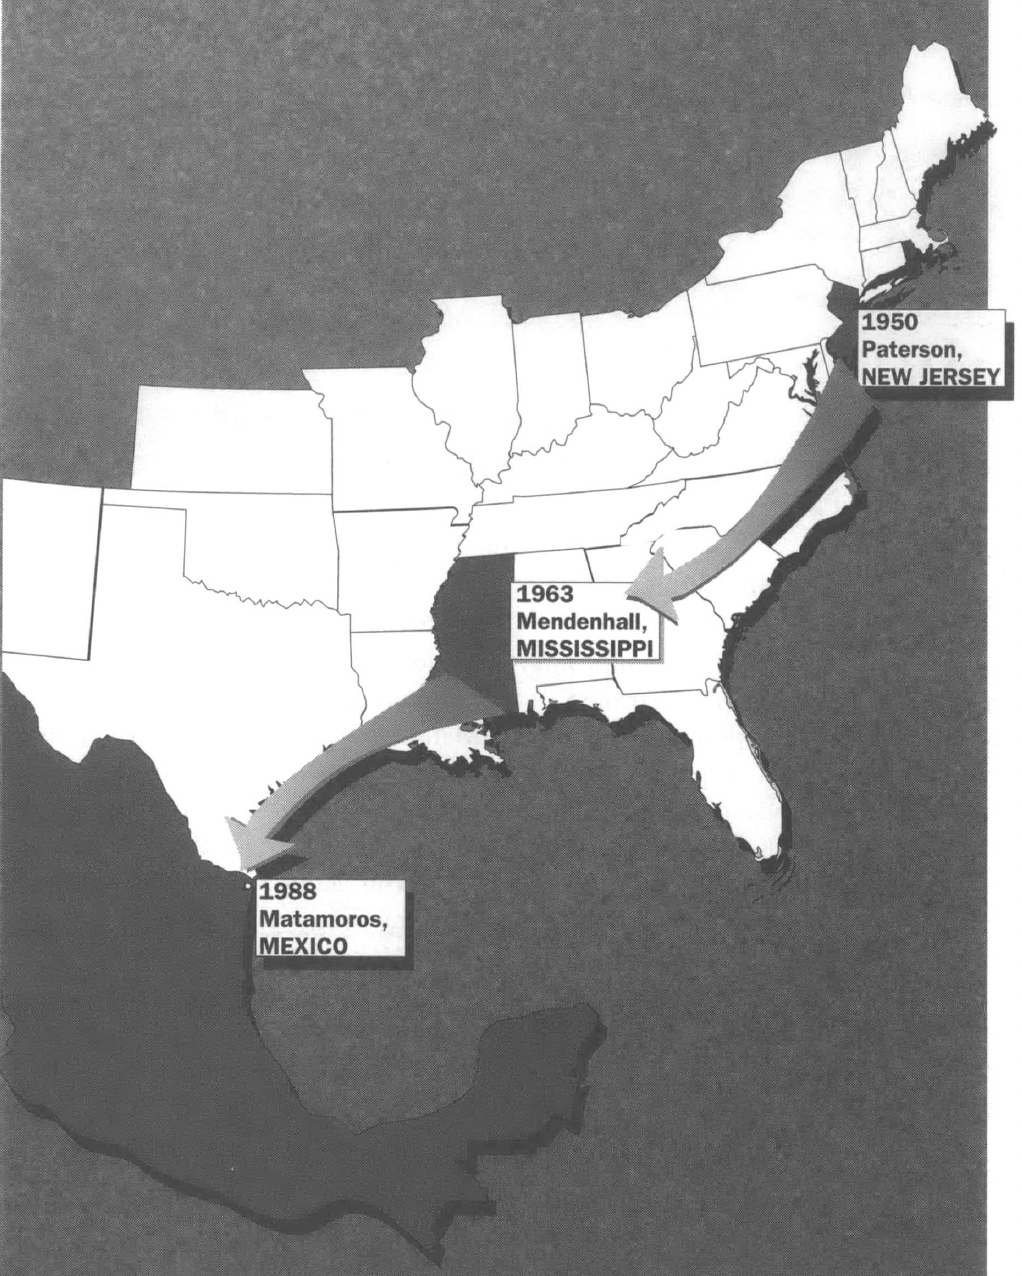 Map showing factory moving down the east coast and eventually across the Texas border